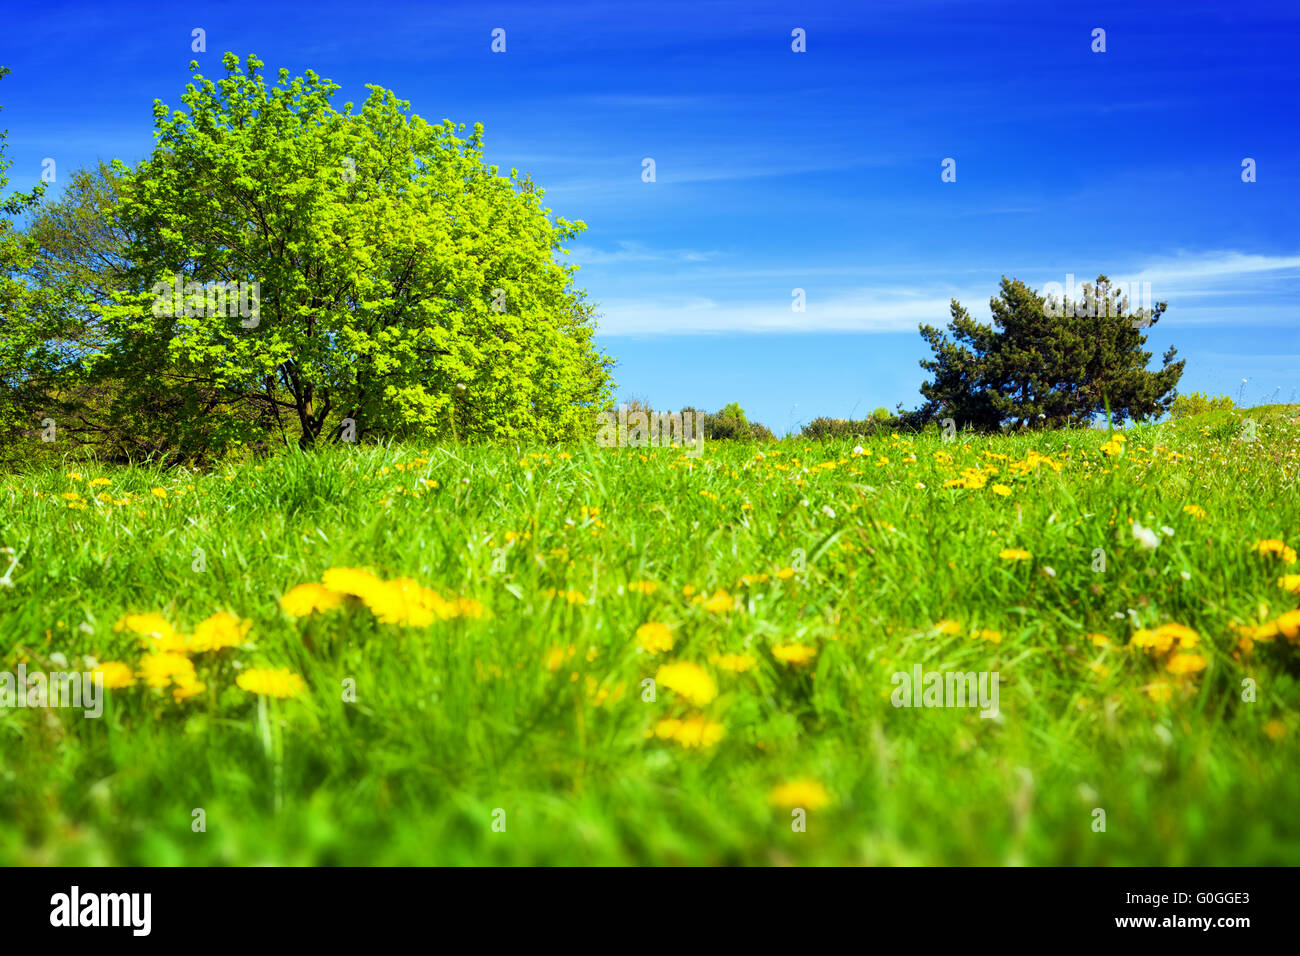 Spring countryside, meadow with green grass, trees and flowers. Stock Photo